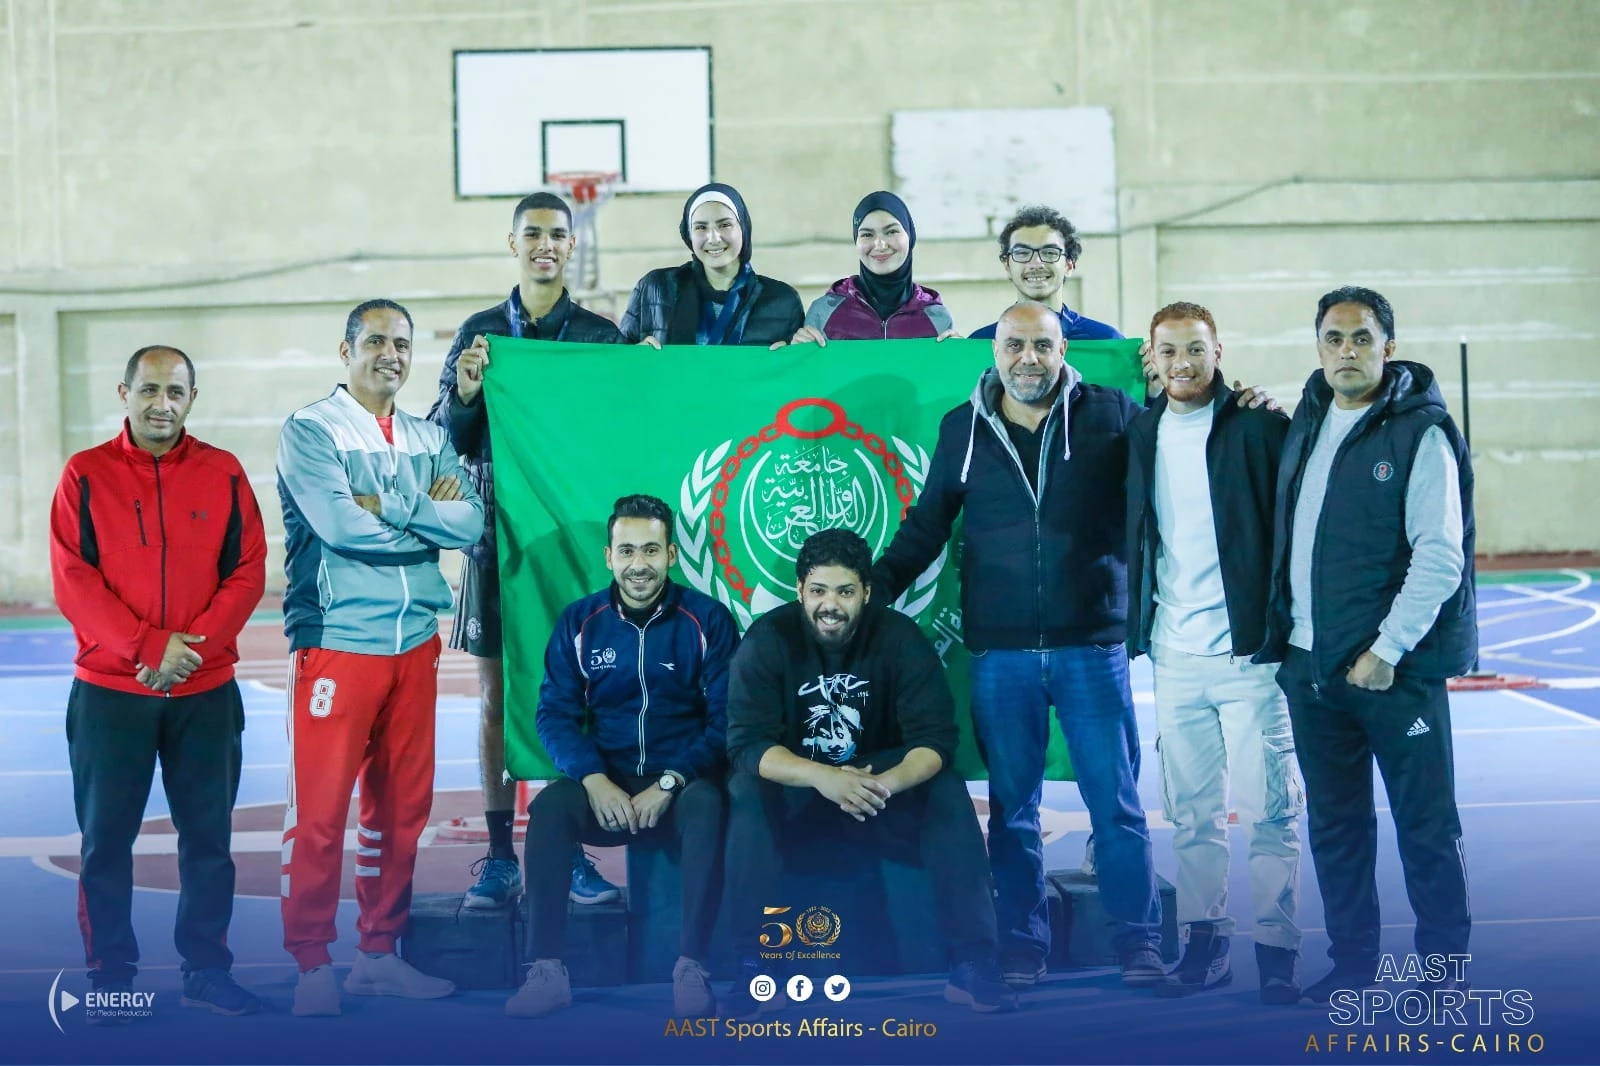 The academy was crowned in Cairo with the first place Cup in the student championship and the first place Cup in the female student championship in the private universities Speedball Championship12